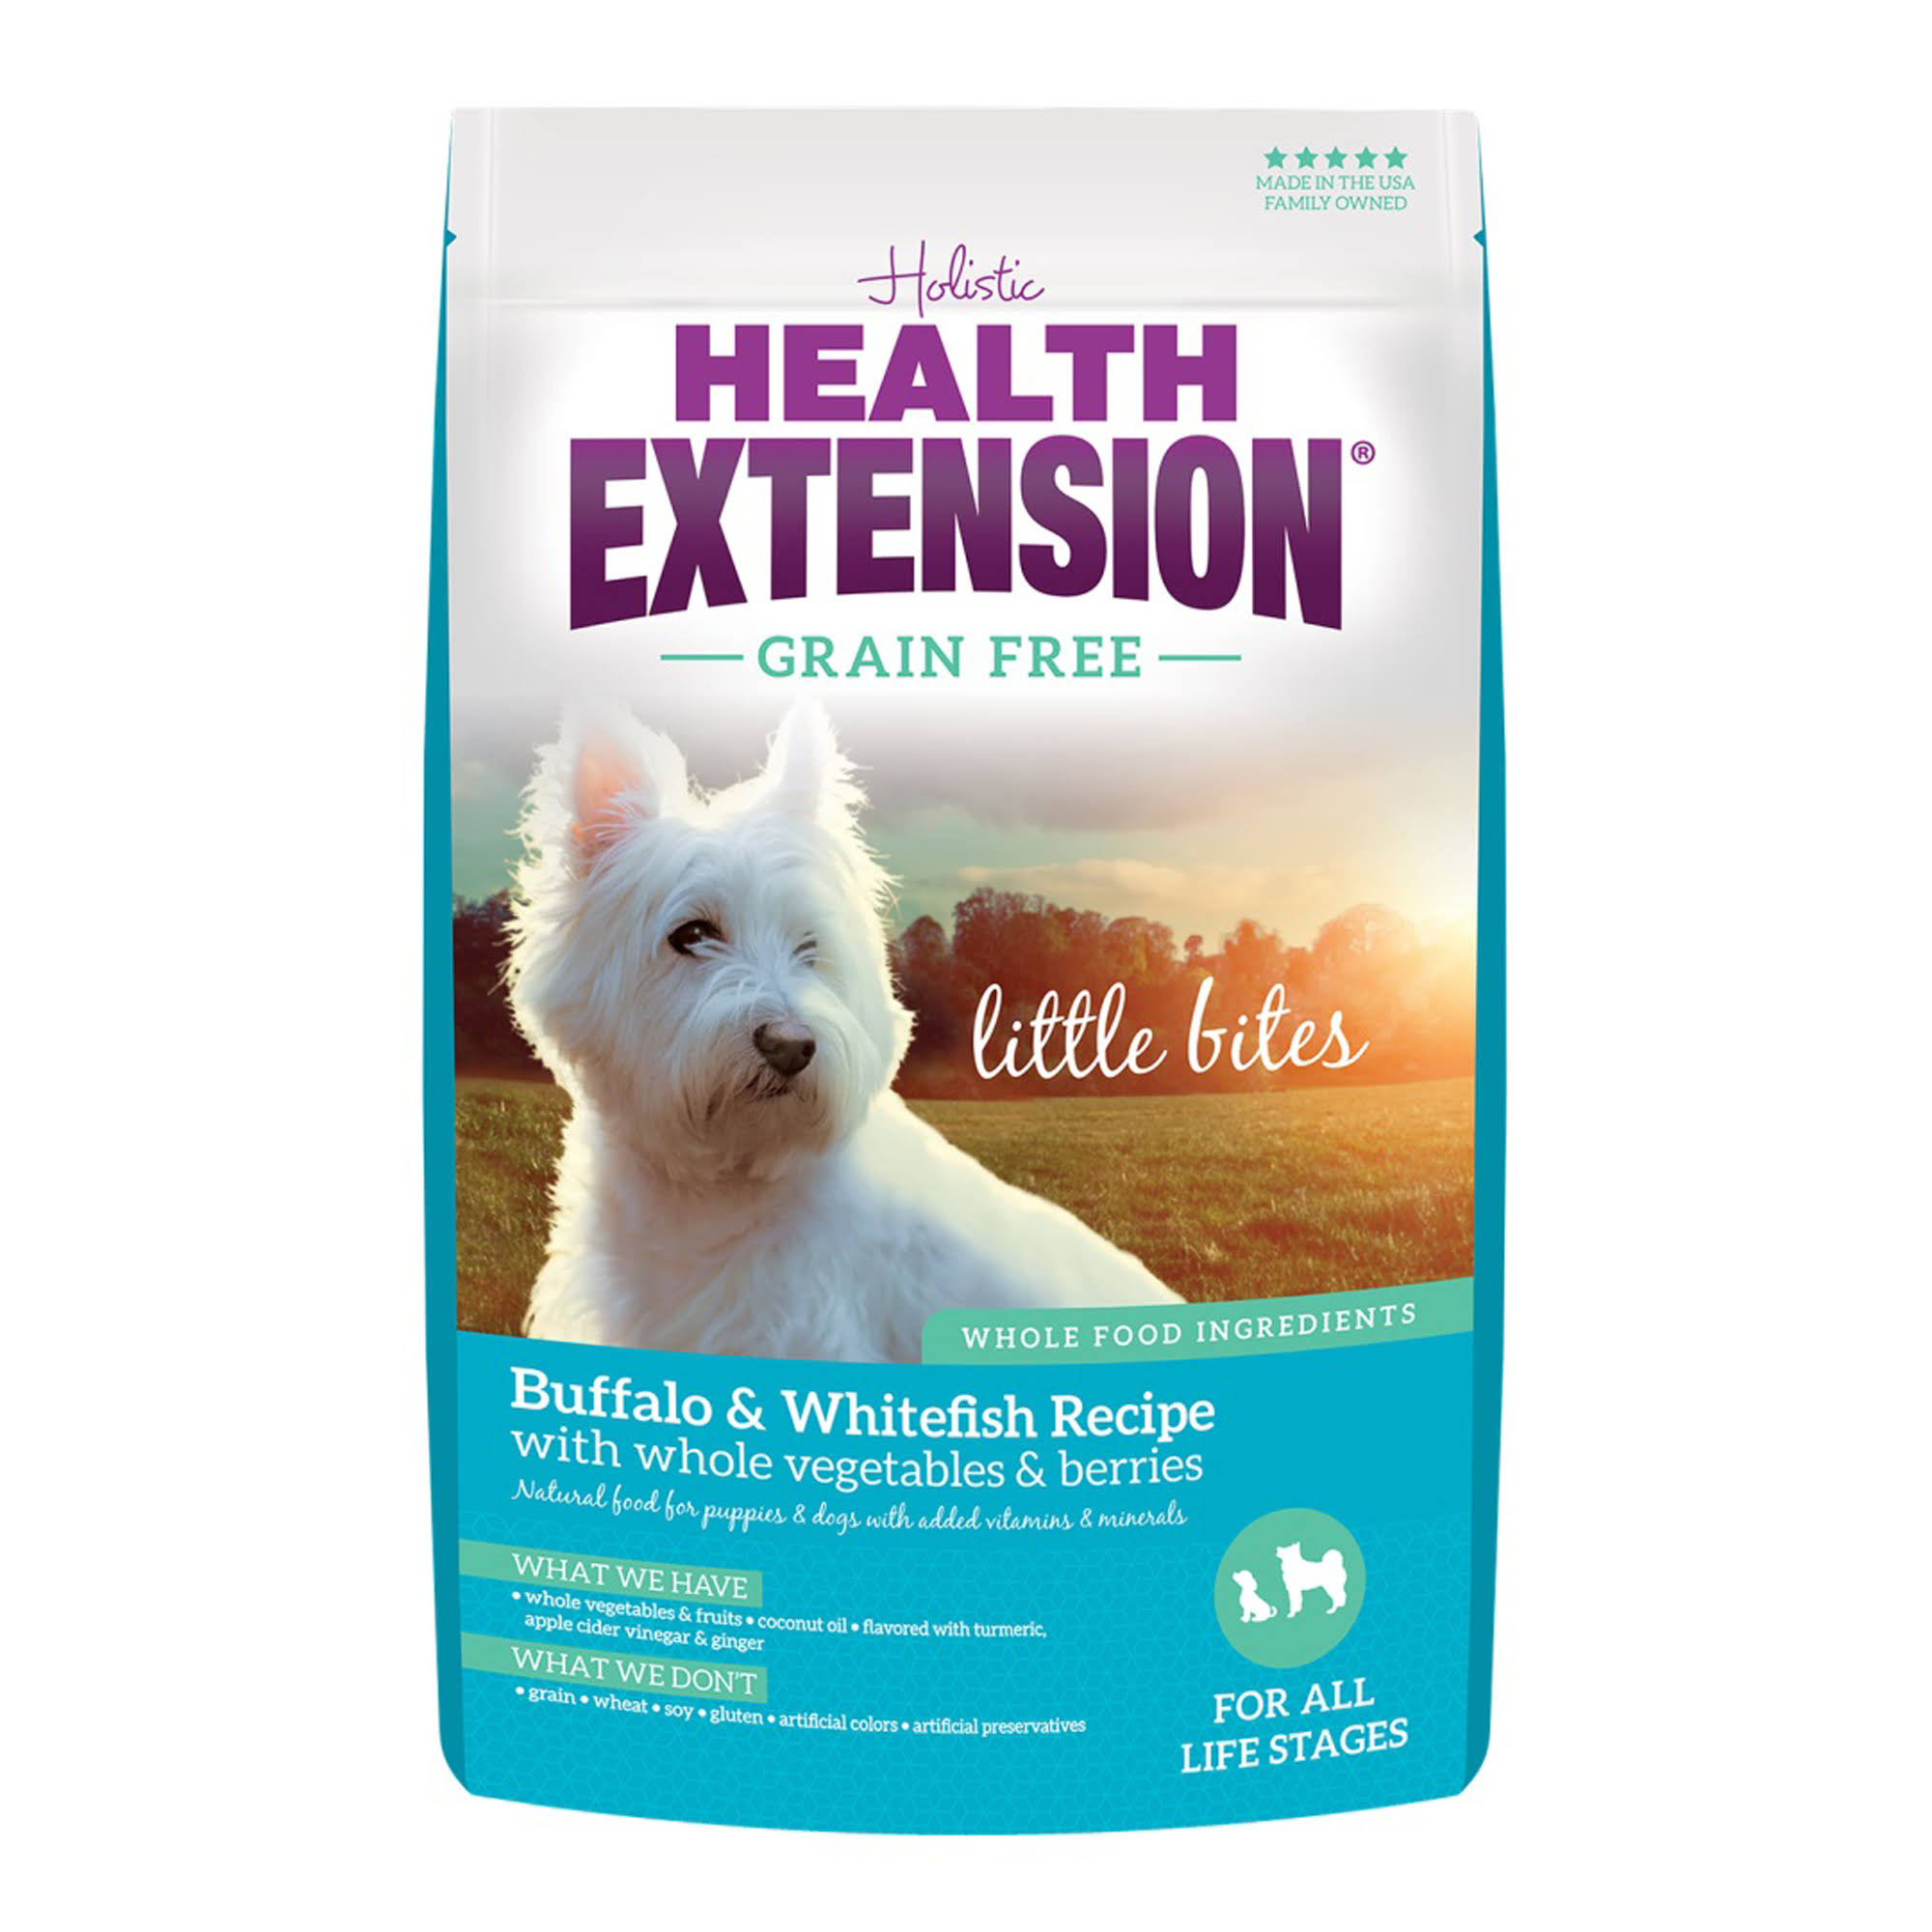 Health Extension Grain Free Little Bites Dog Food - Buffalo and Whitefish, 23.5lb